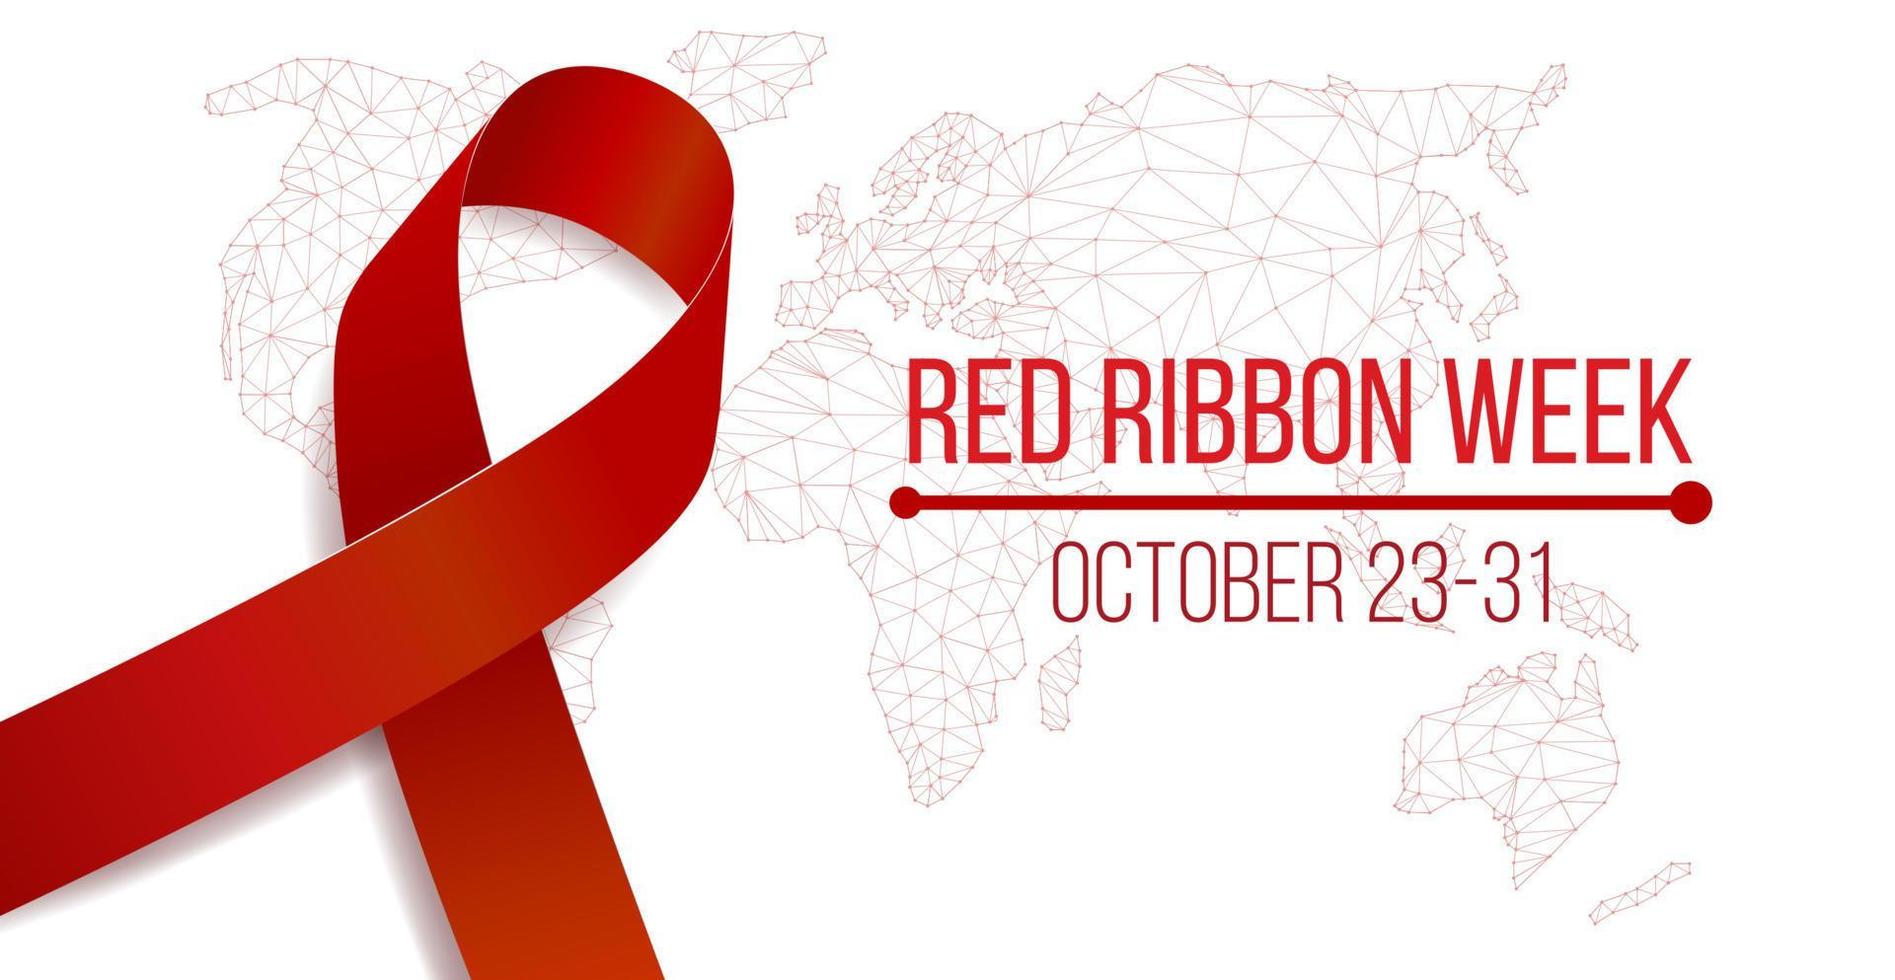 Red ribbon week concept. Banner with red ribbon awareness and text. Vector illustration.